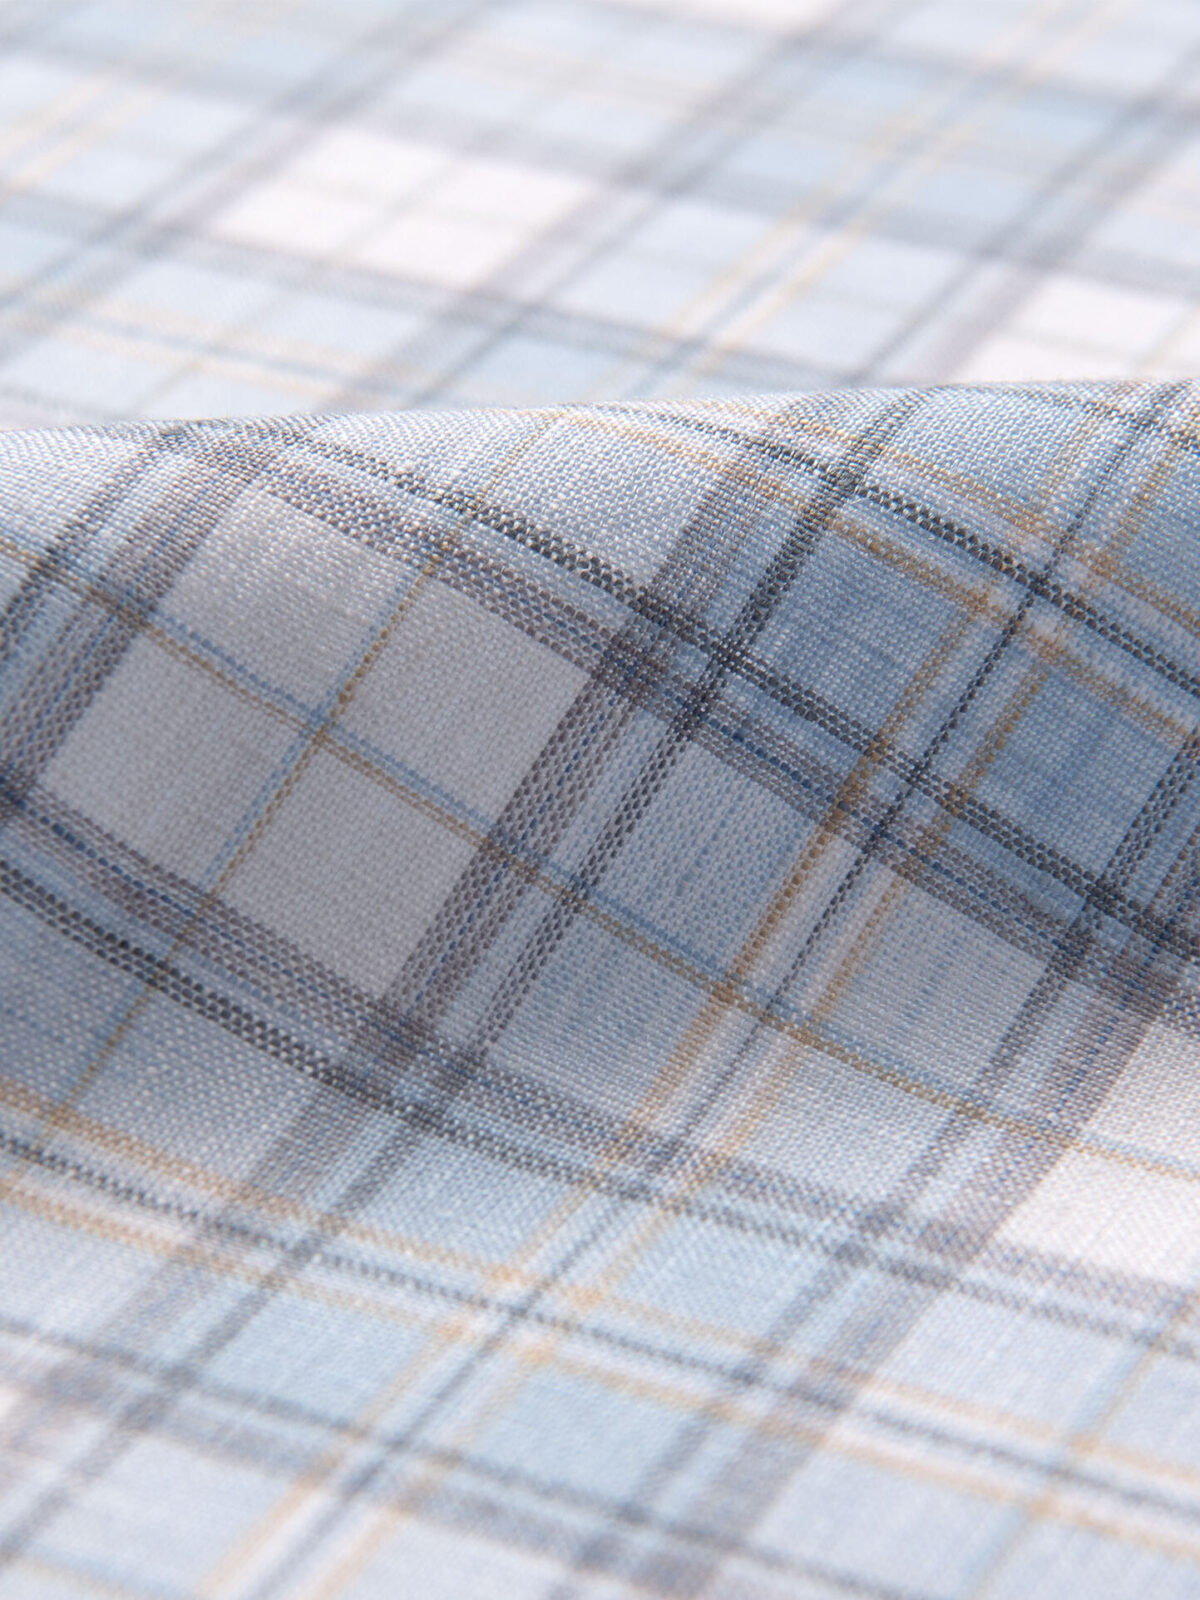 Cutting the Granville Shirt in Plaid Fabric